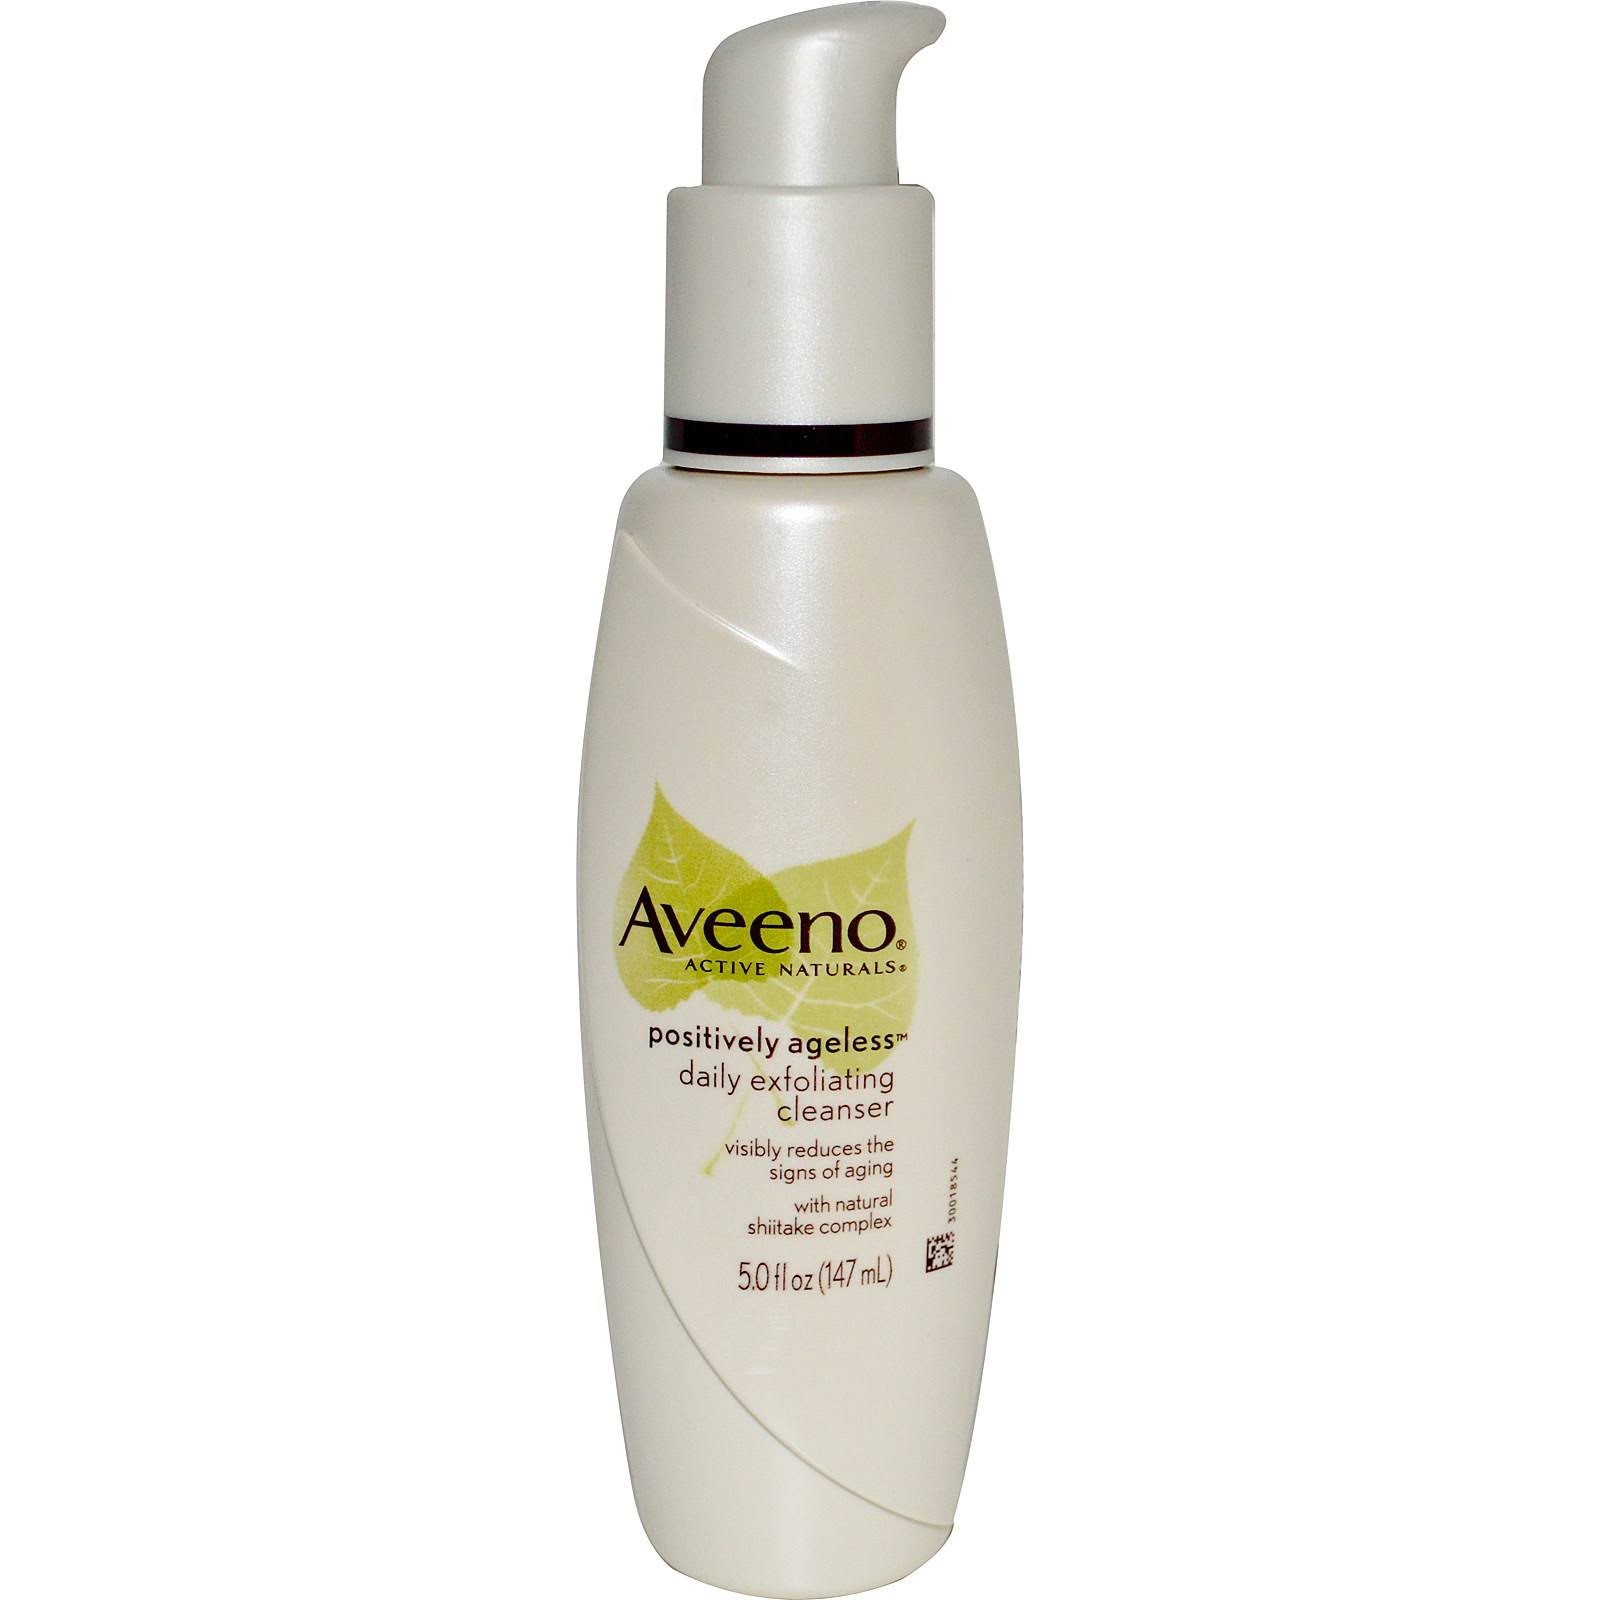 Aveeno Positively Ageless Daily Exfoliating Cleanser With Natural Shiitake Complex - 5 oz